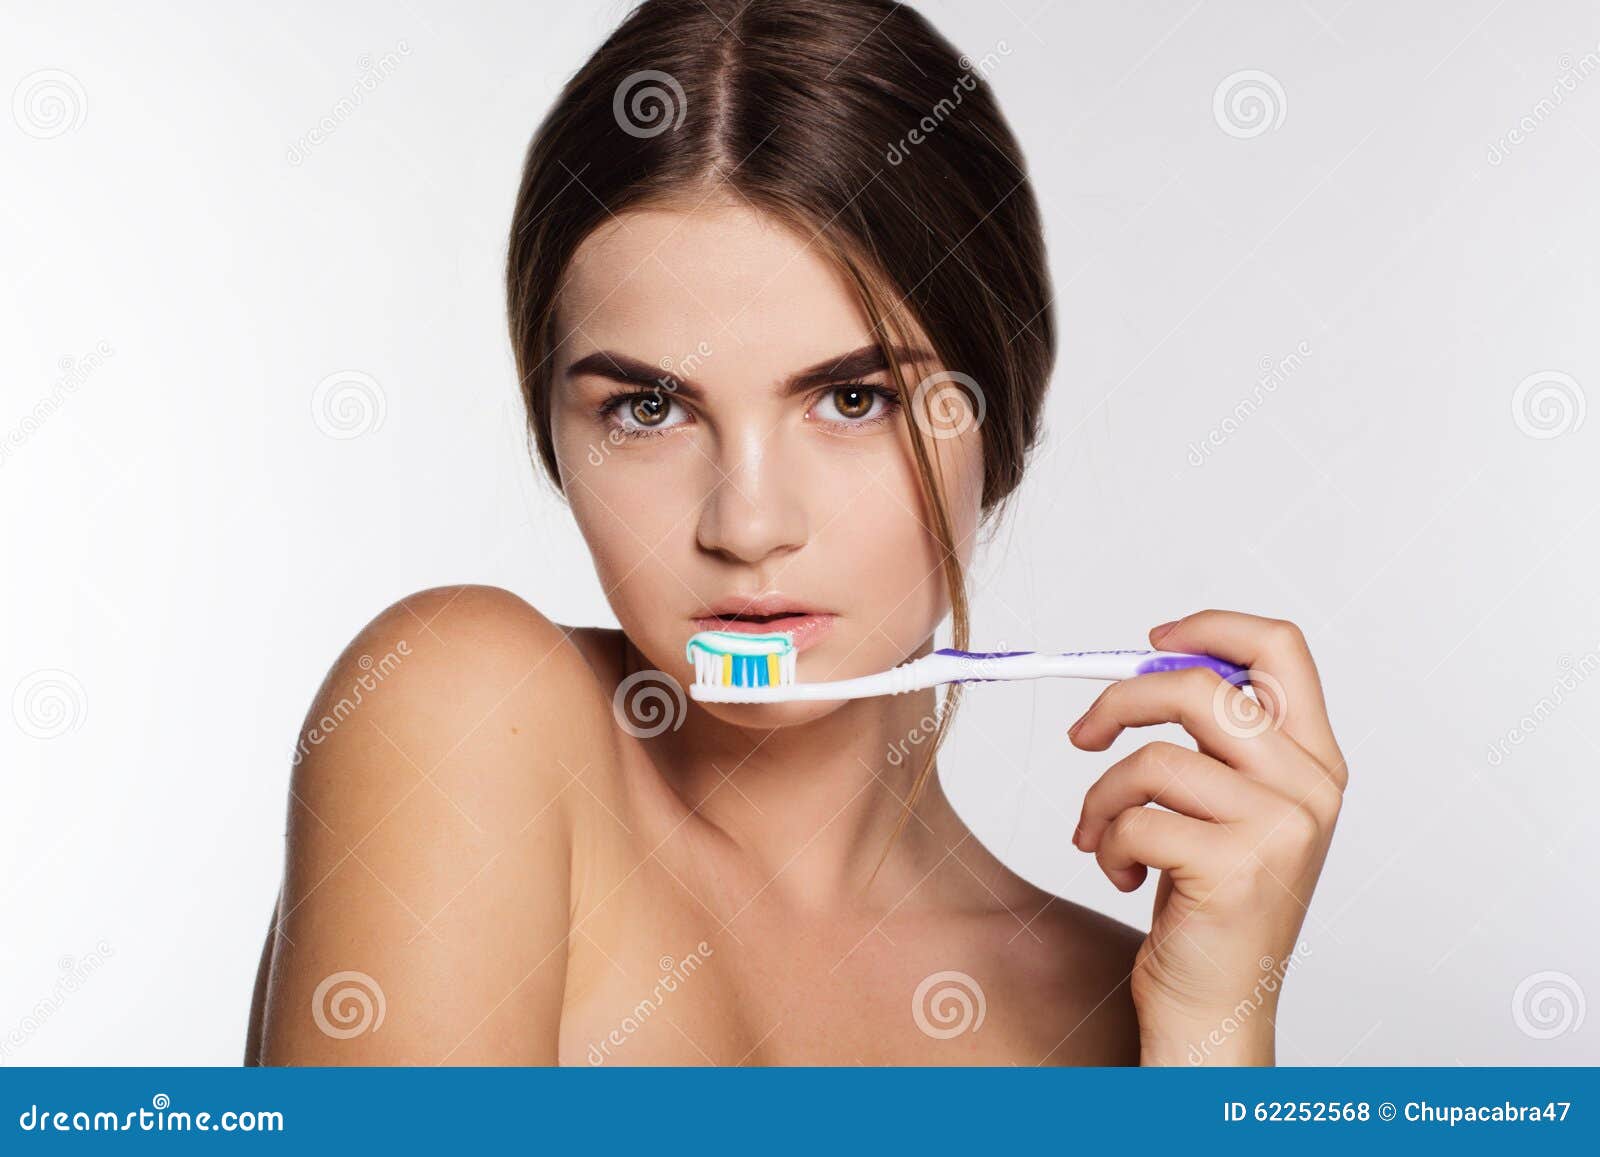 Teen Girl Is Holding Toothbrush With Dentifrice Stock Photo Image Of